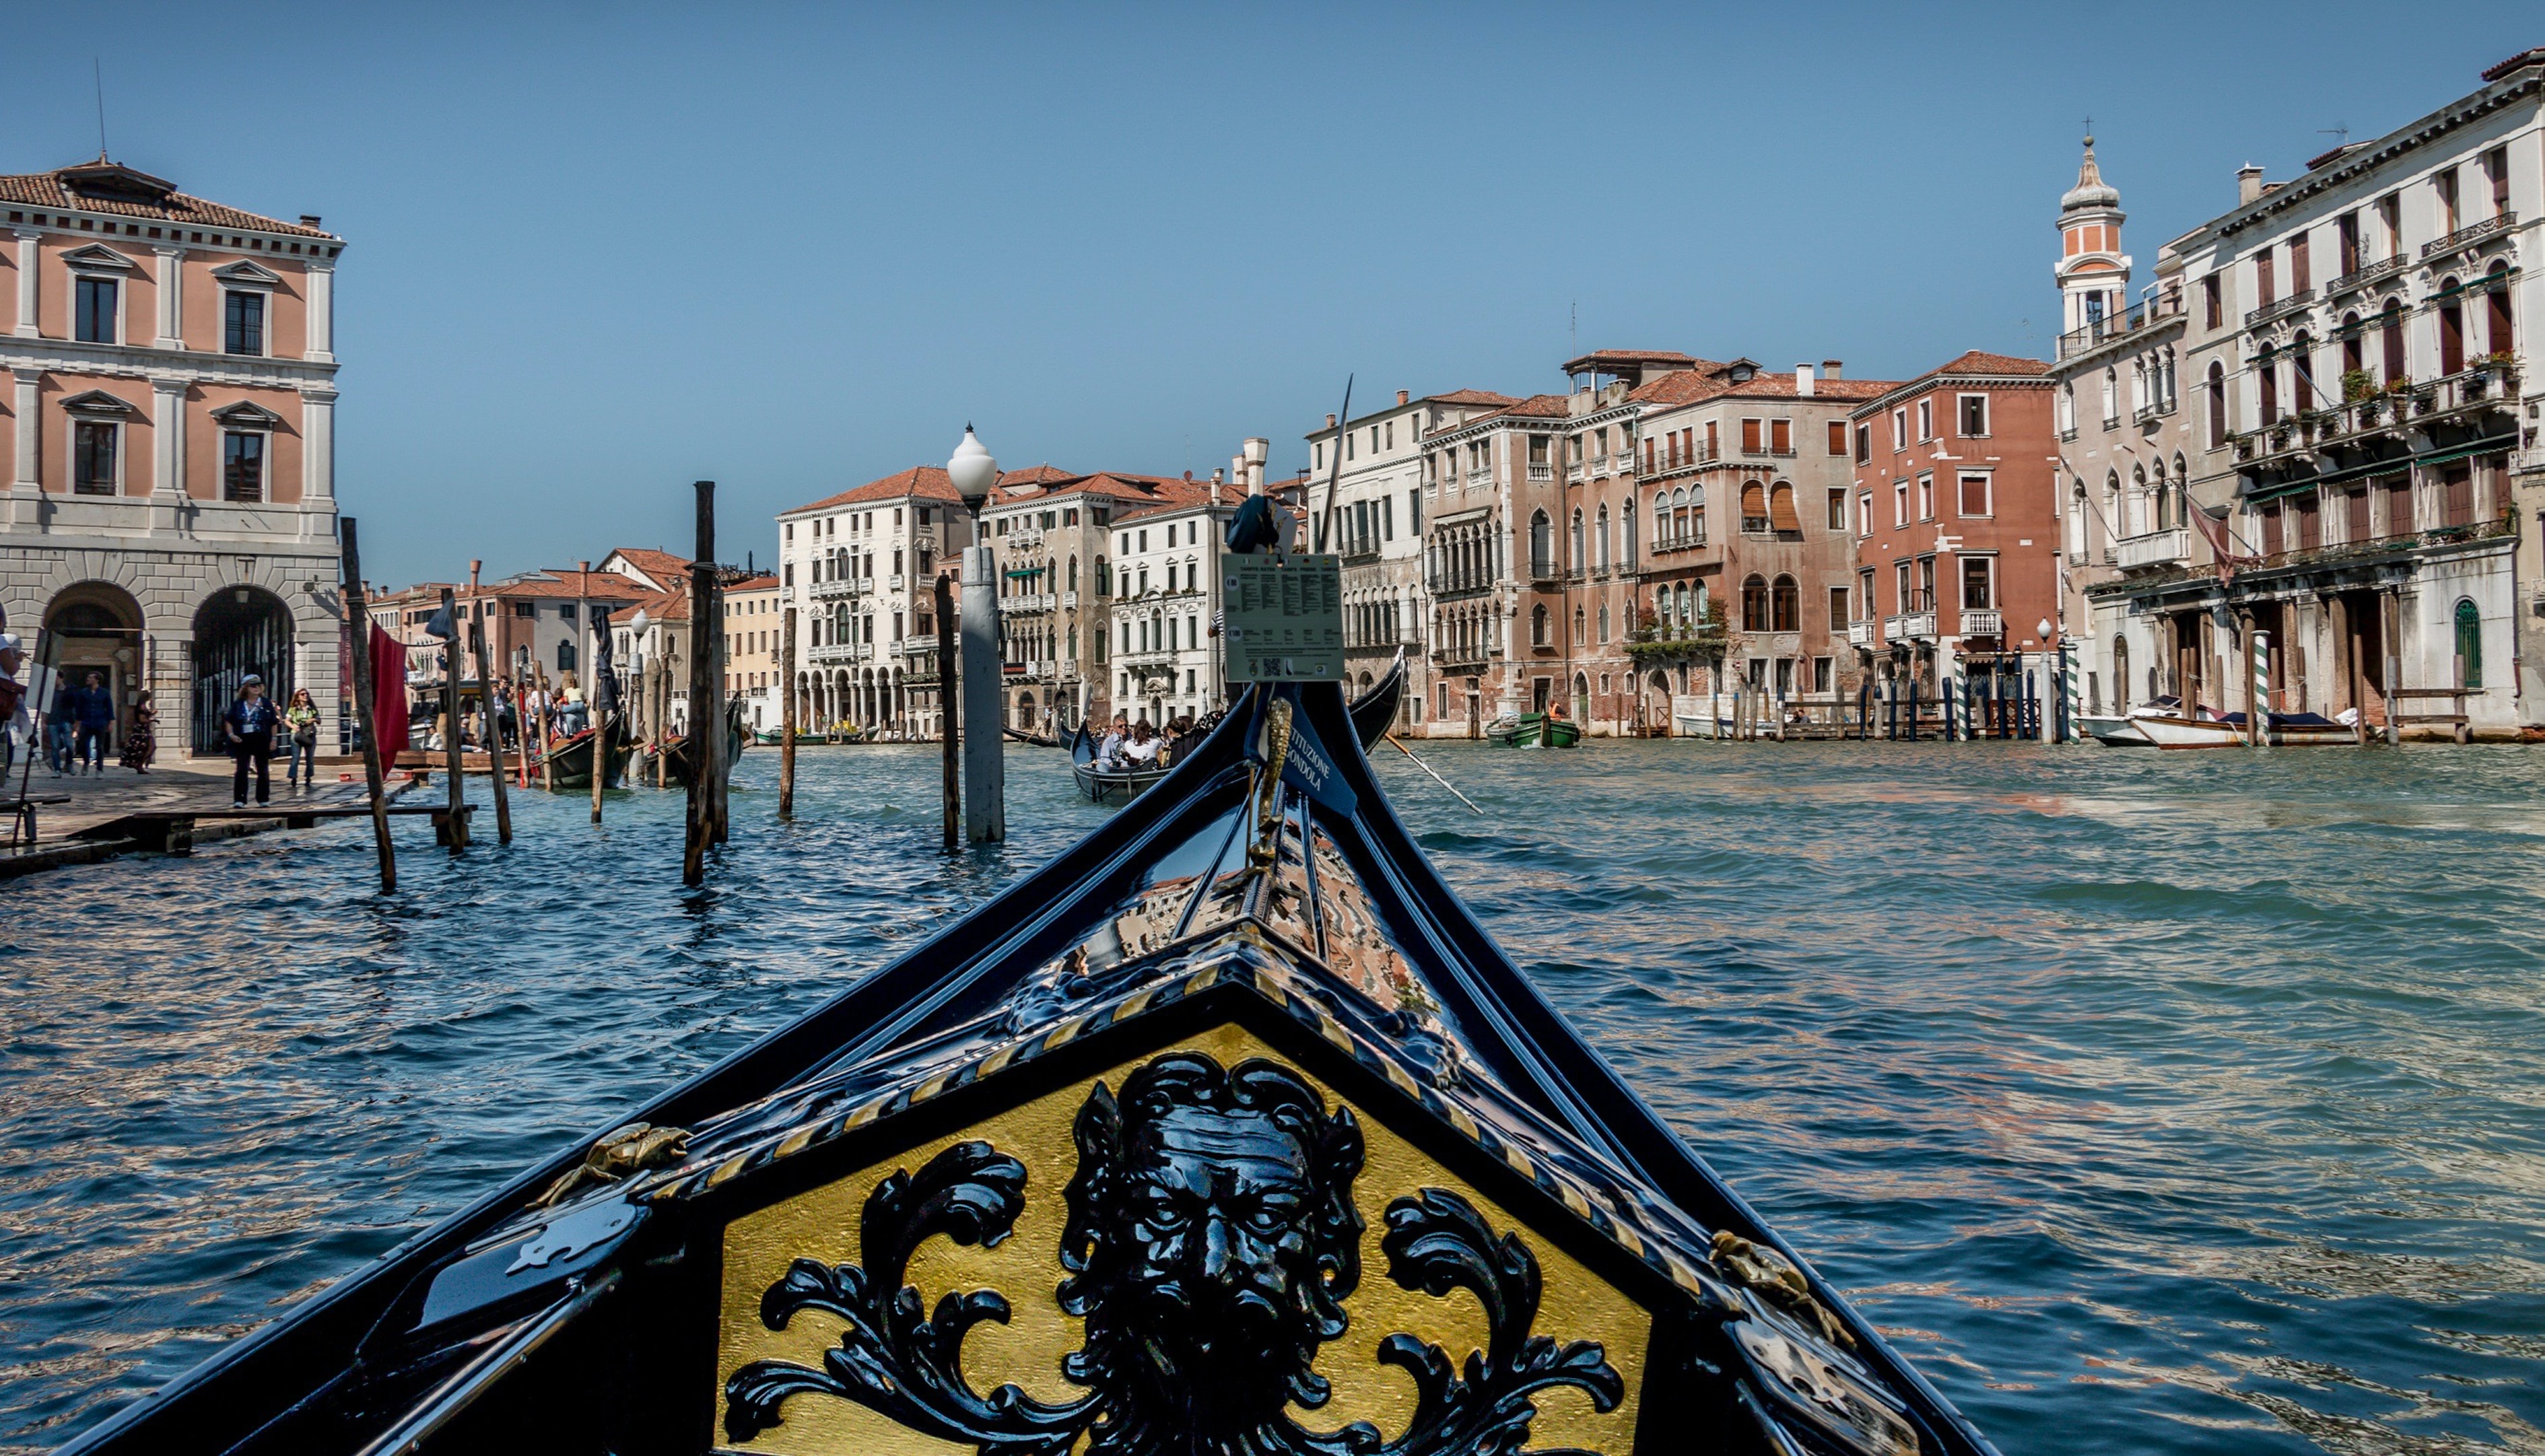 Cover Image for Maximizing Your Gondola Ride: Tips for the Best Views, Photos & Companies